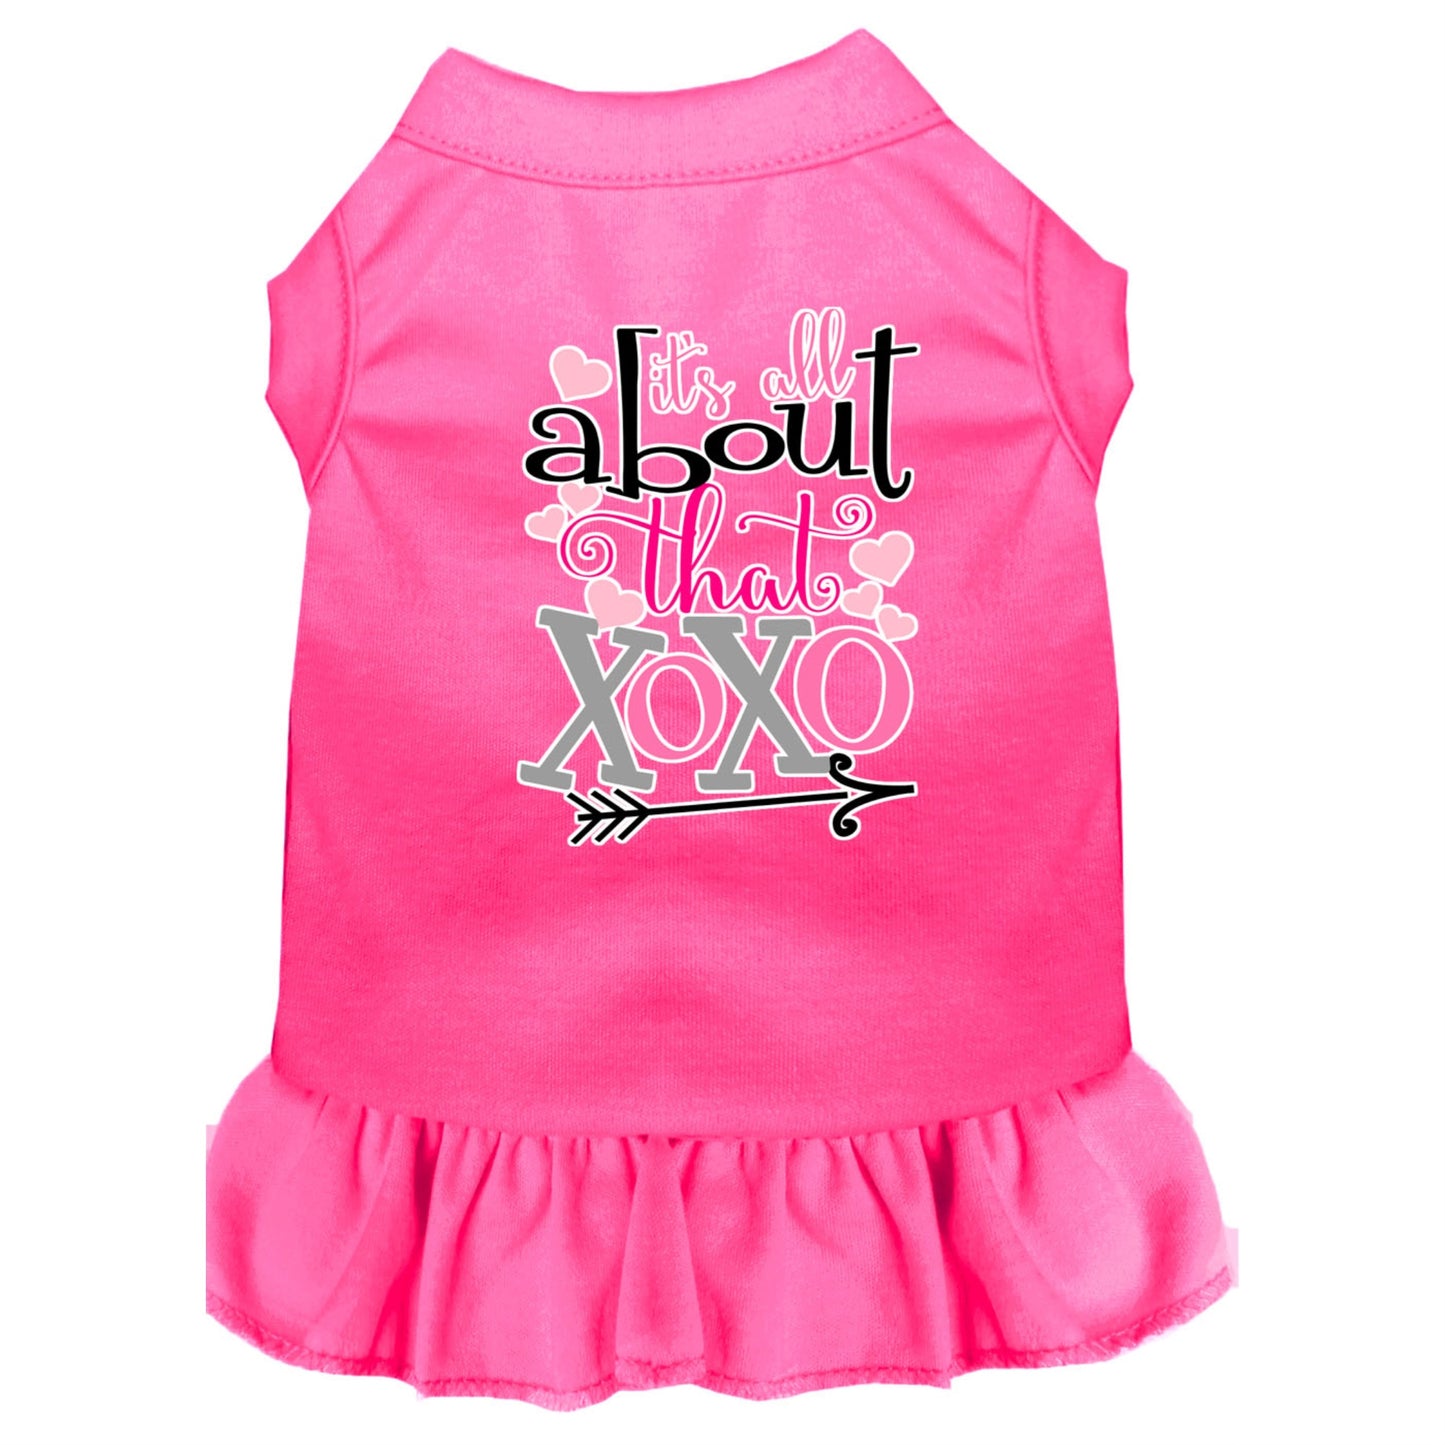 All about the XOXO - Dress Bright Pink